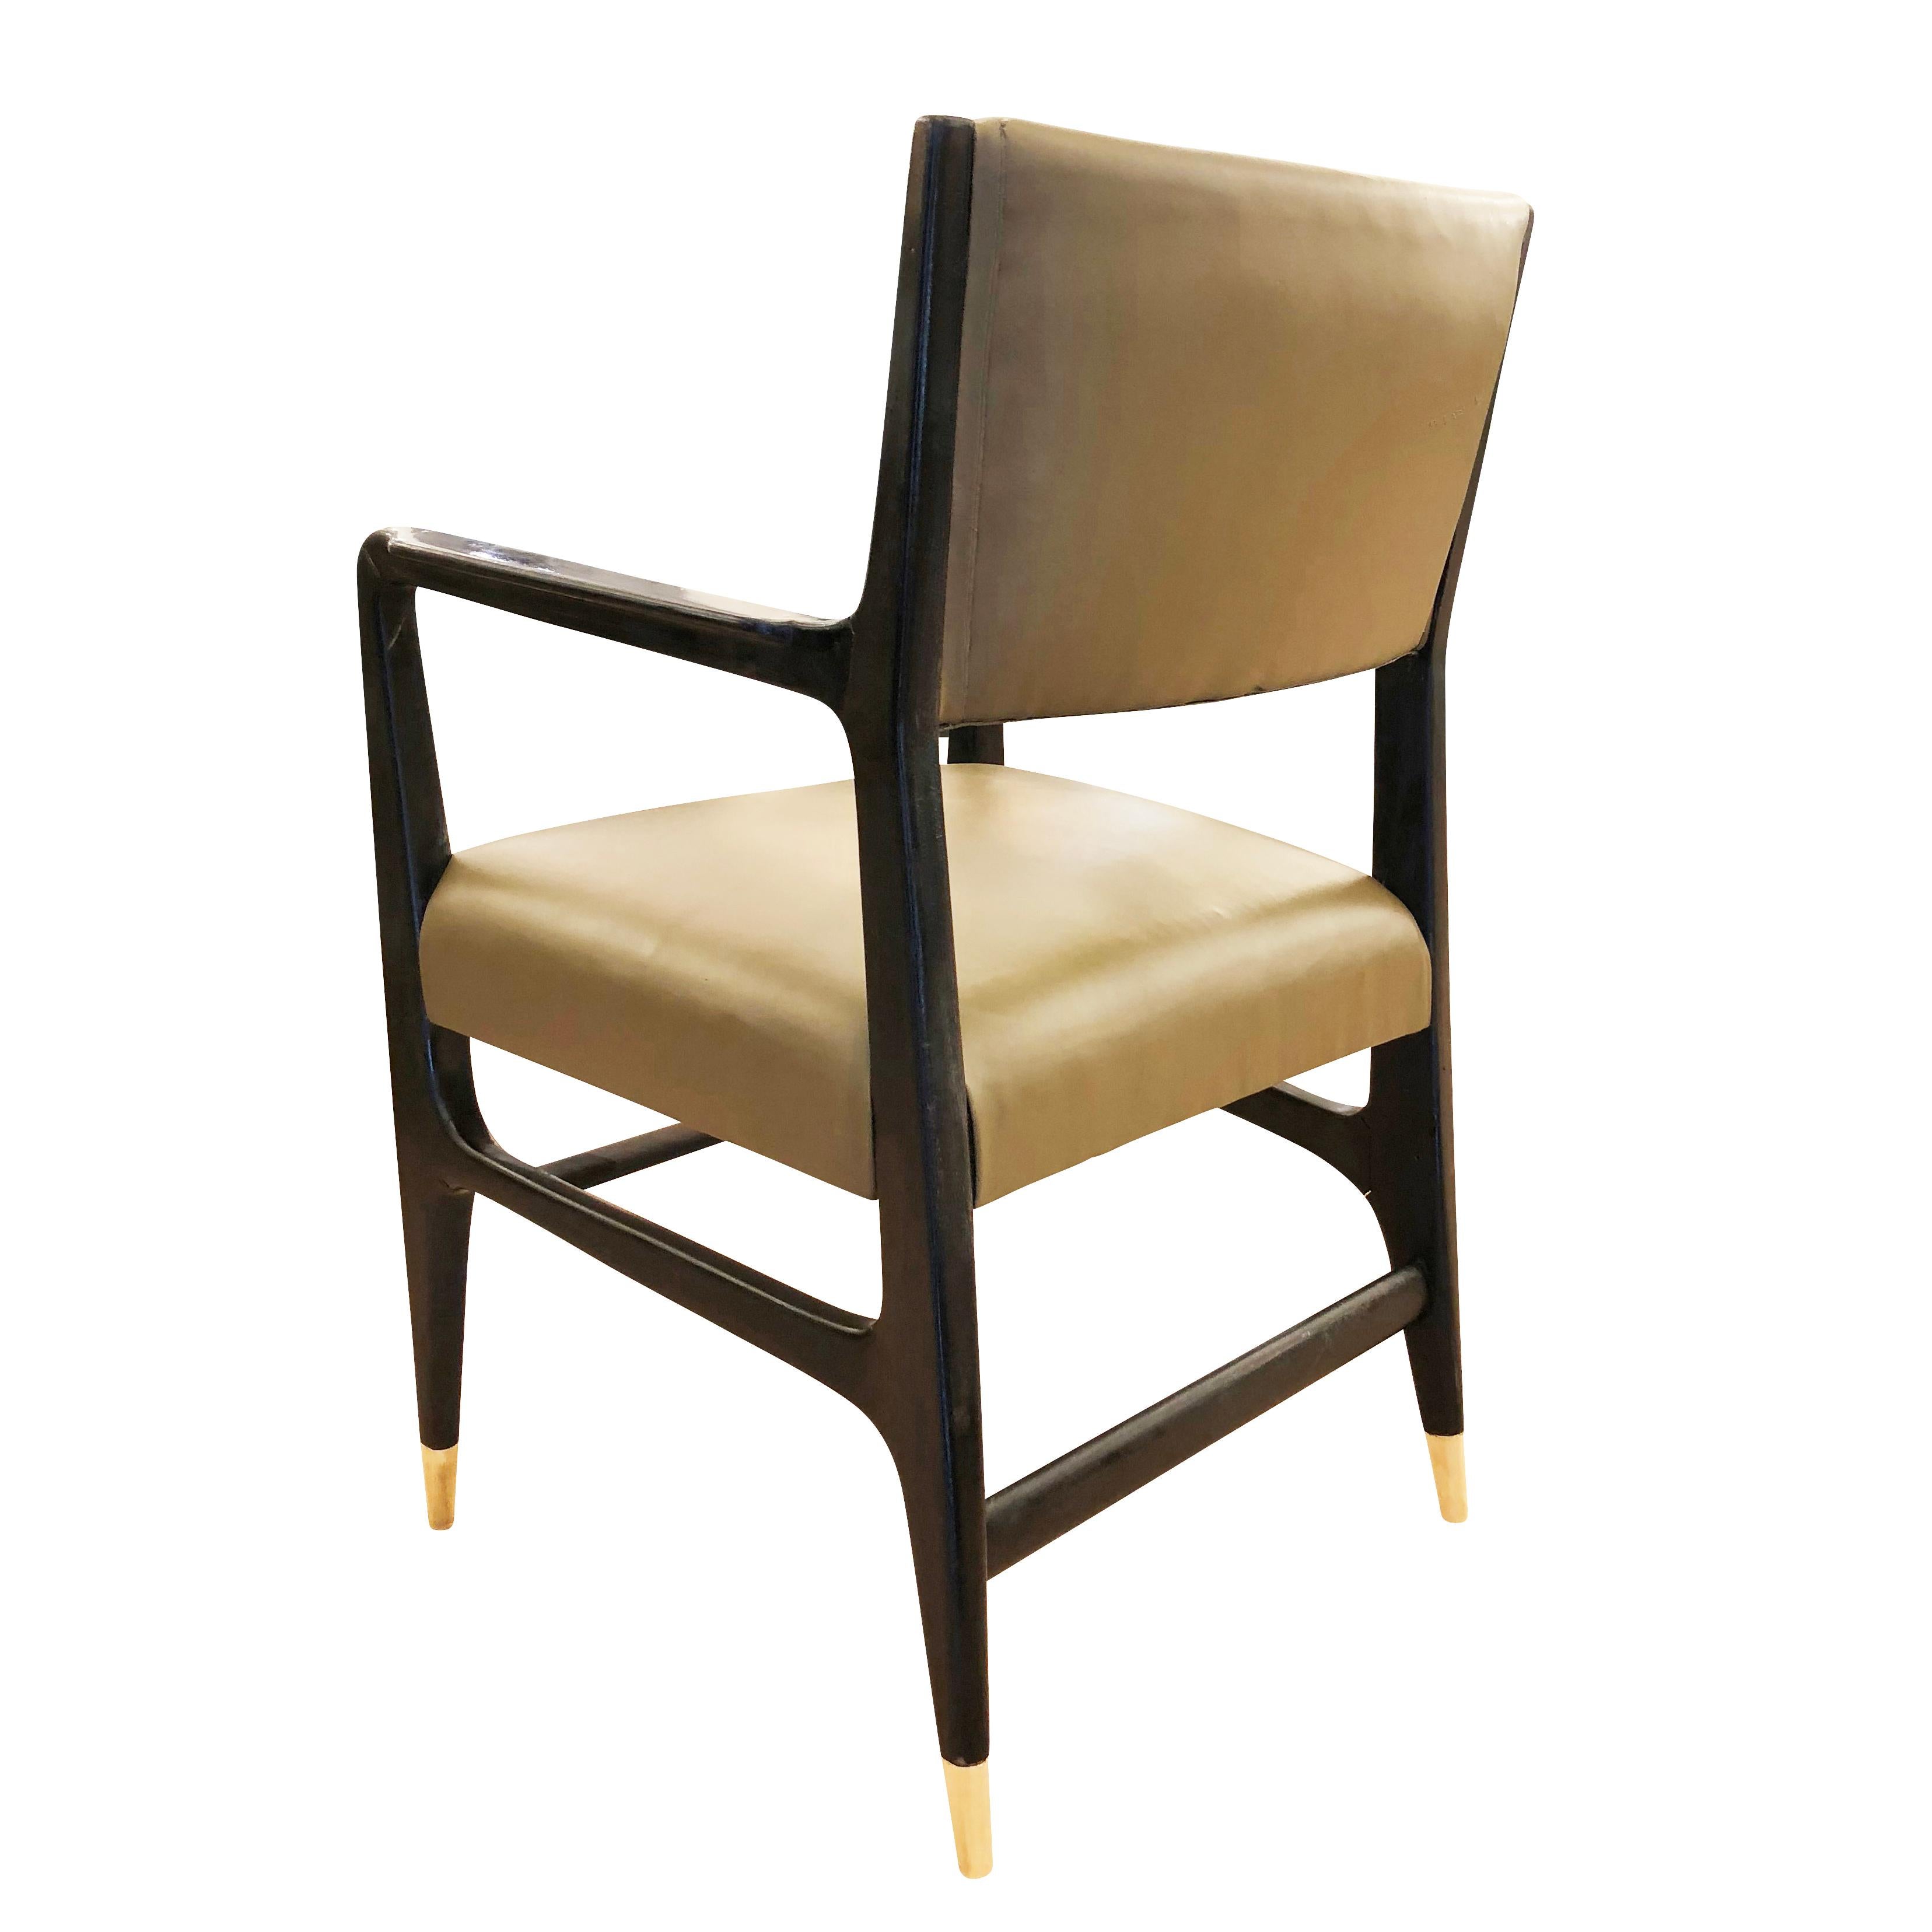 Gio Ponti armchair manufactured by Cassina in the 1950s. In original condition with ebonized frame, green leather covering and brass feet.

Condition: Good vintage condition, minor wear consistent with age and use.

Measures: Width